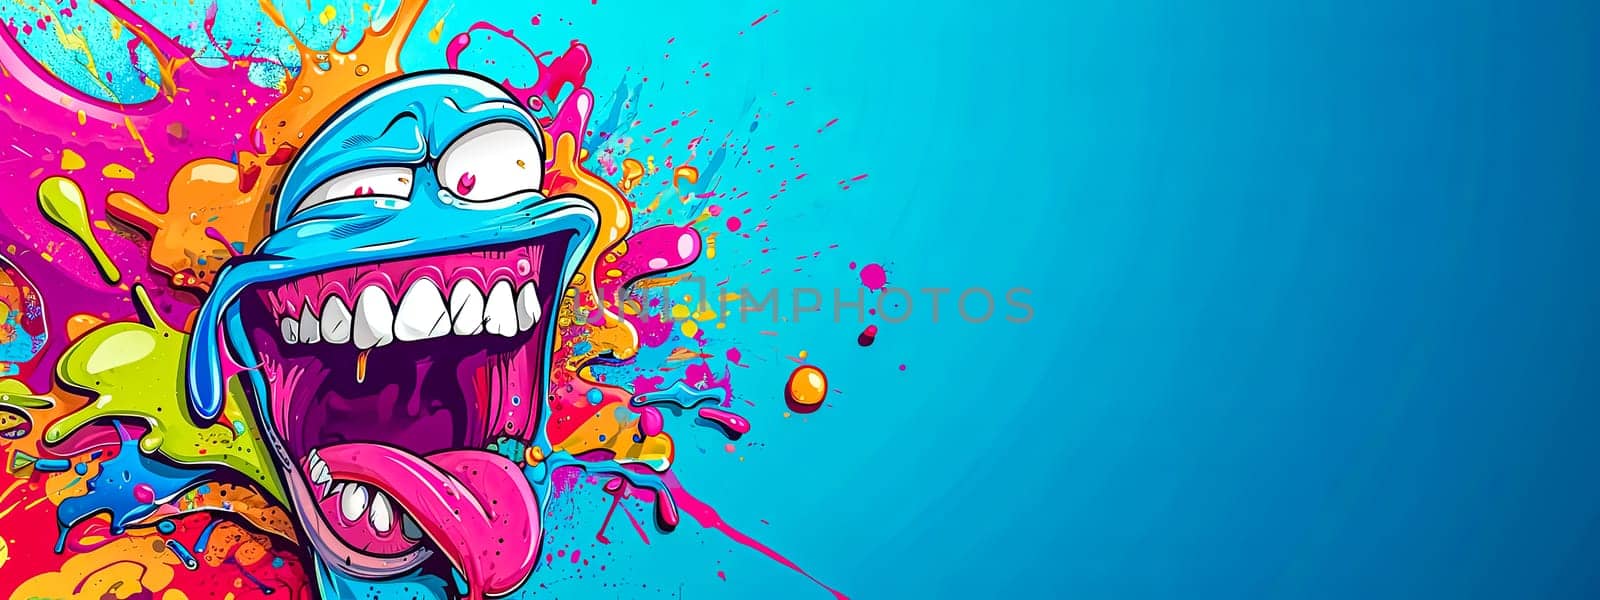 A vibrant character bursting with energy, featuring a wide-eyed expression and a large, open mouth amidst a dynamic splash of colorful paint against a bright blue background